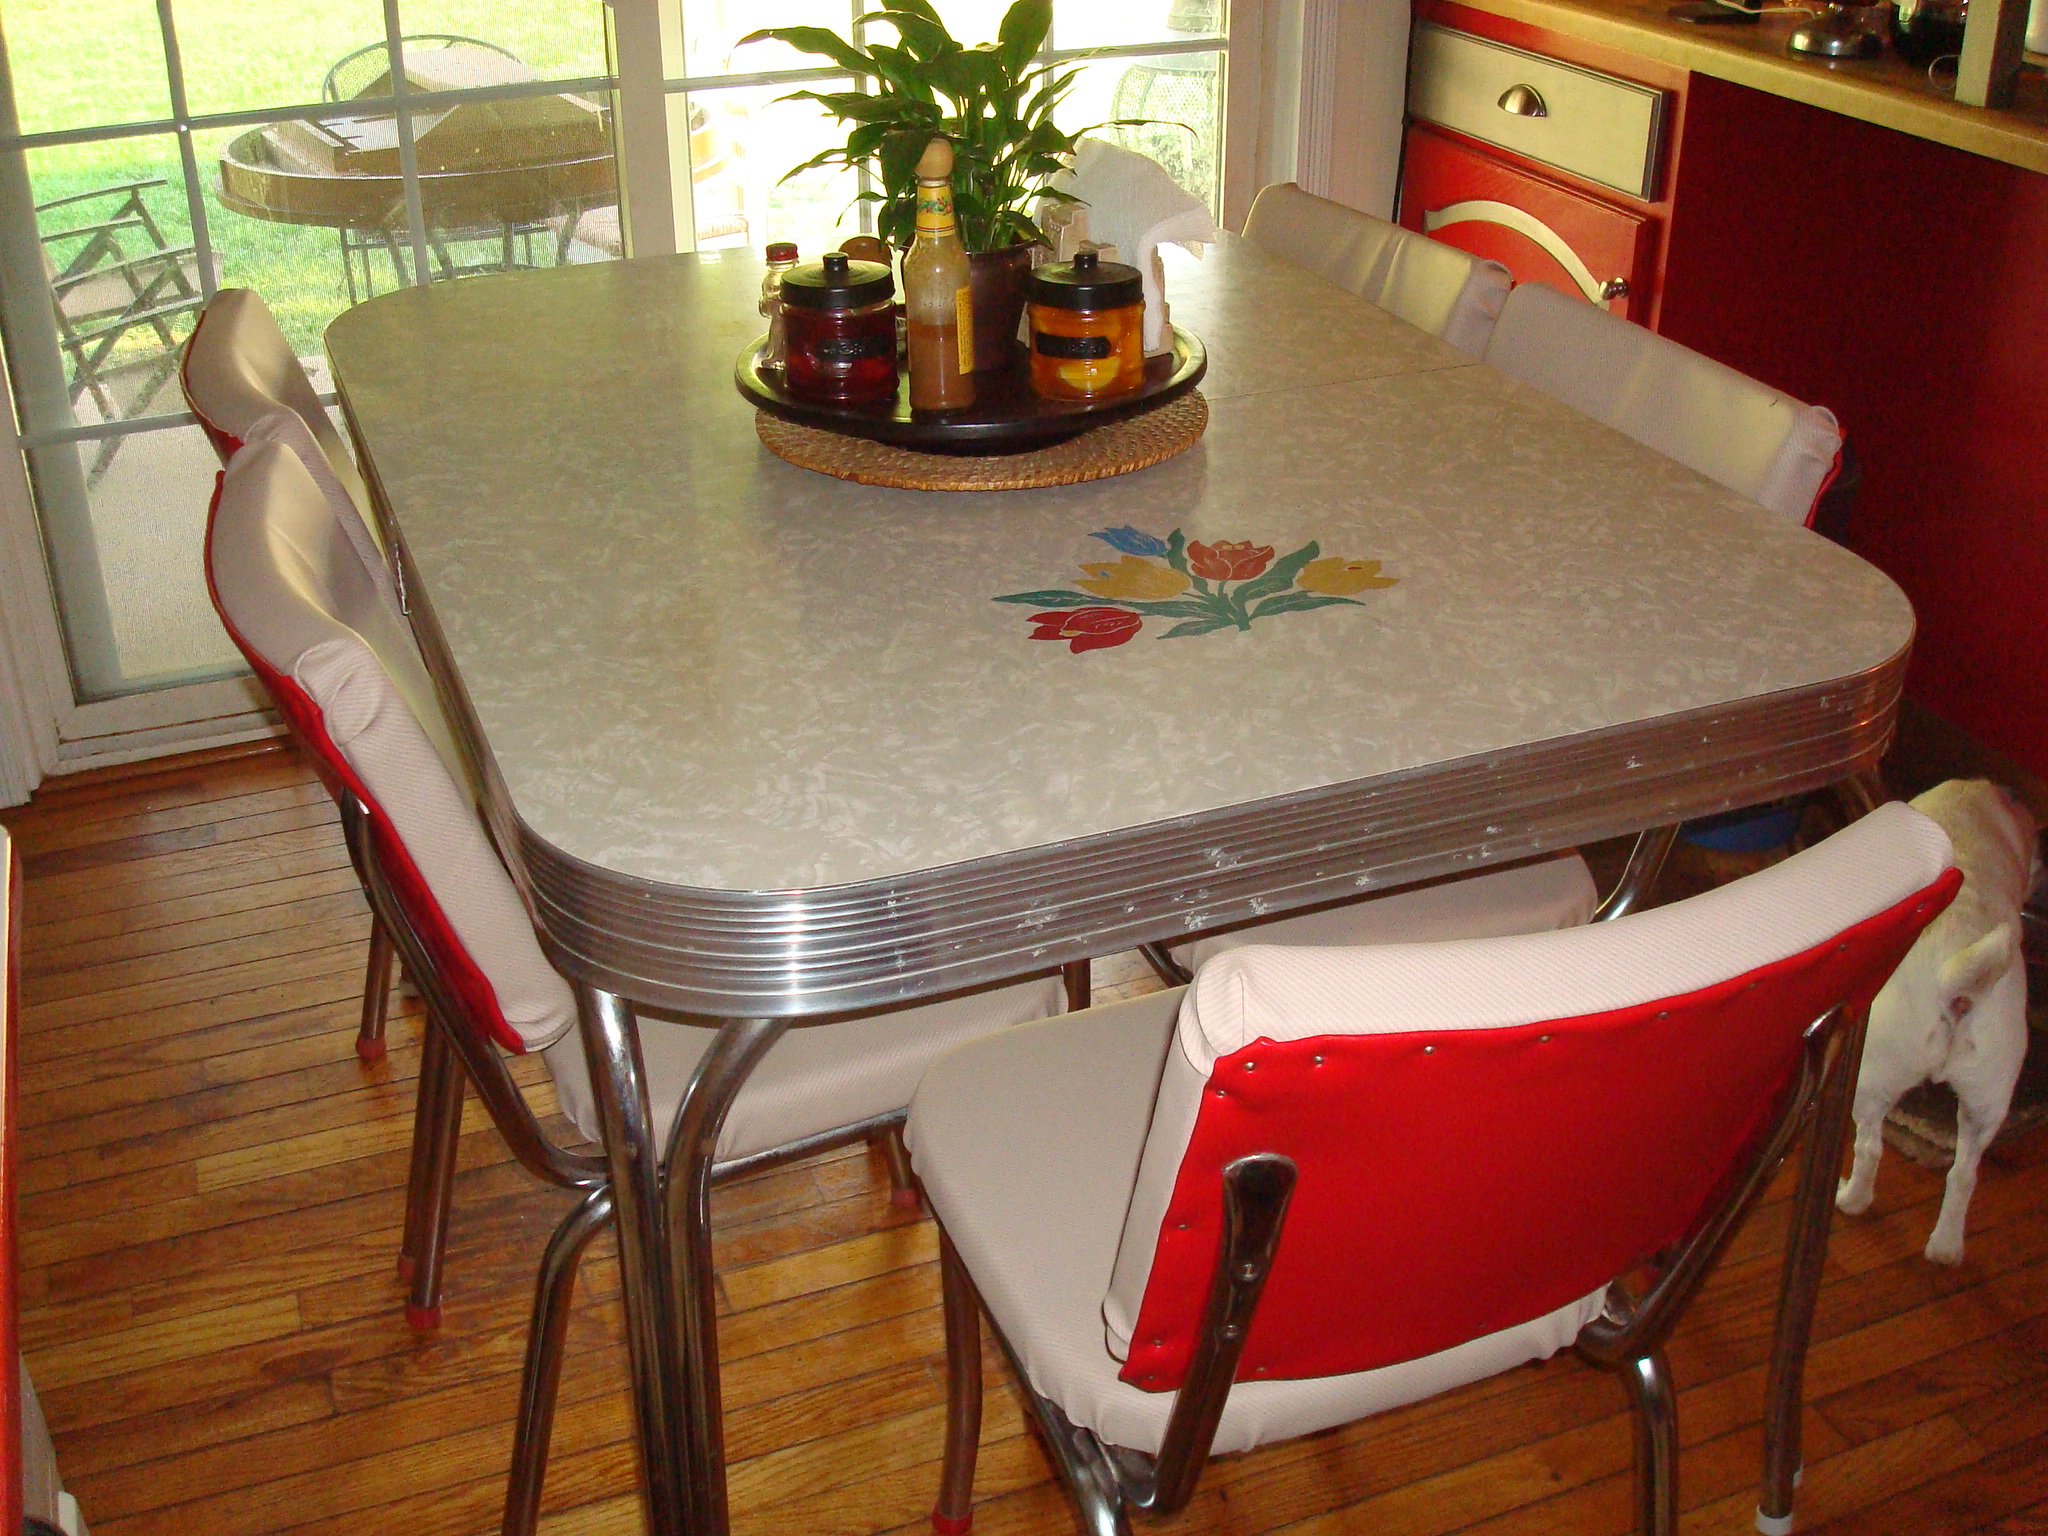 1950 kitchen table with place for utensils